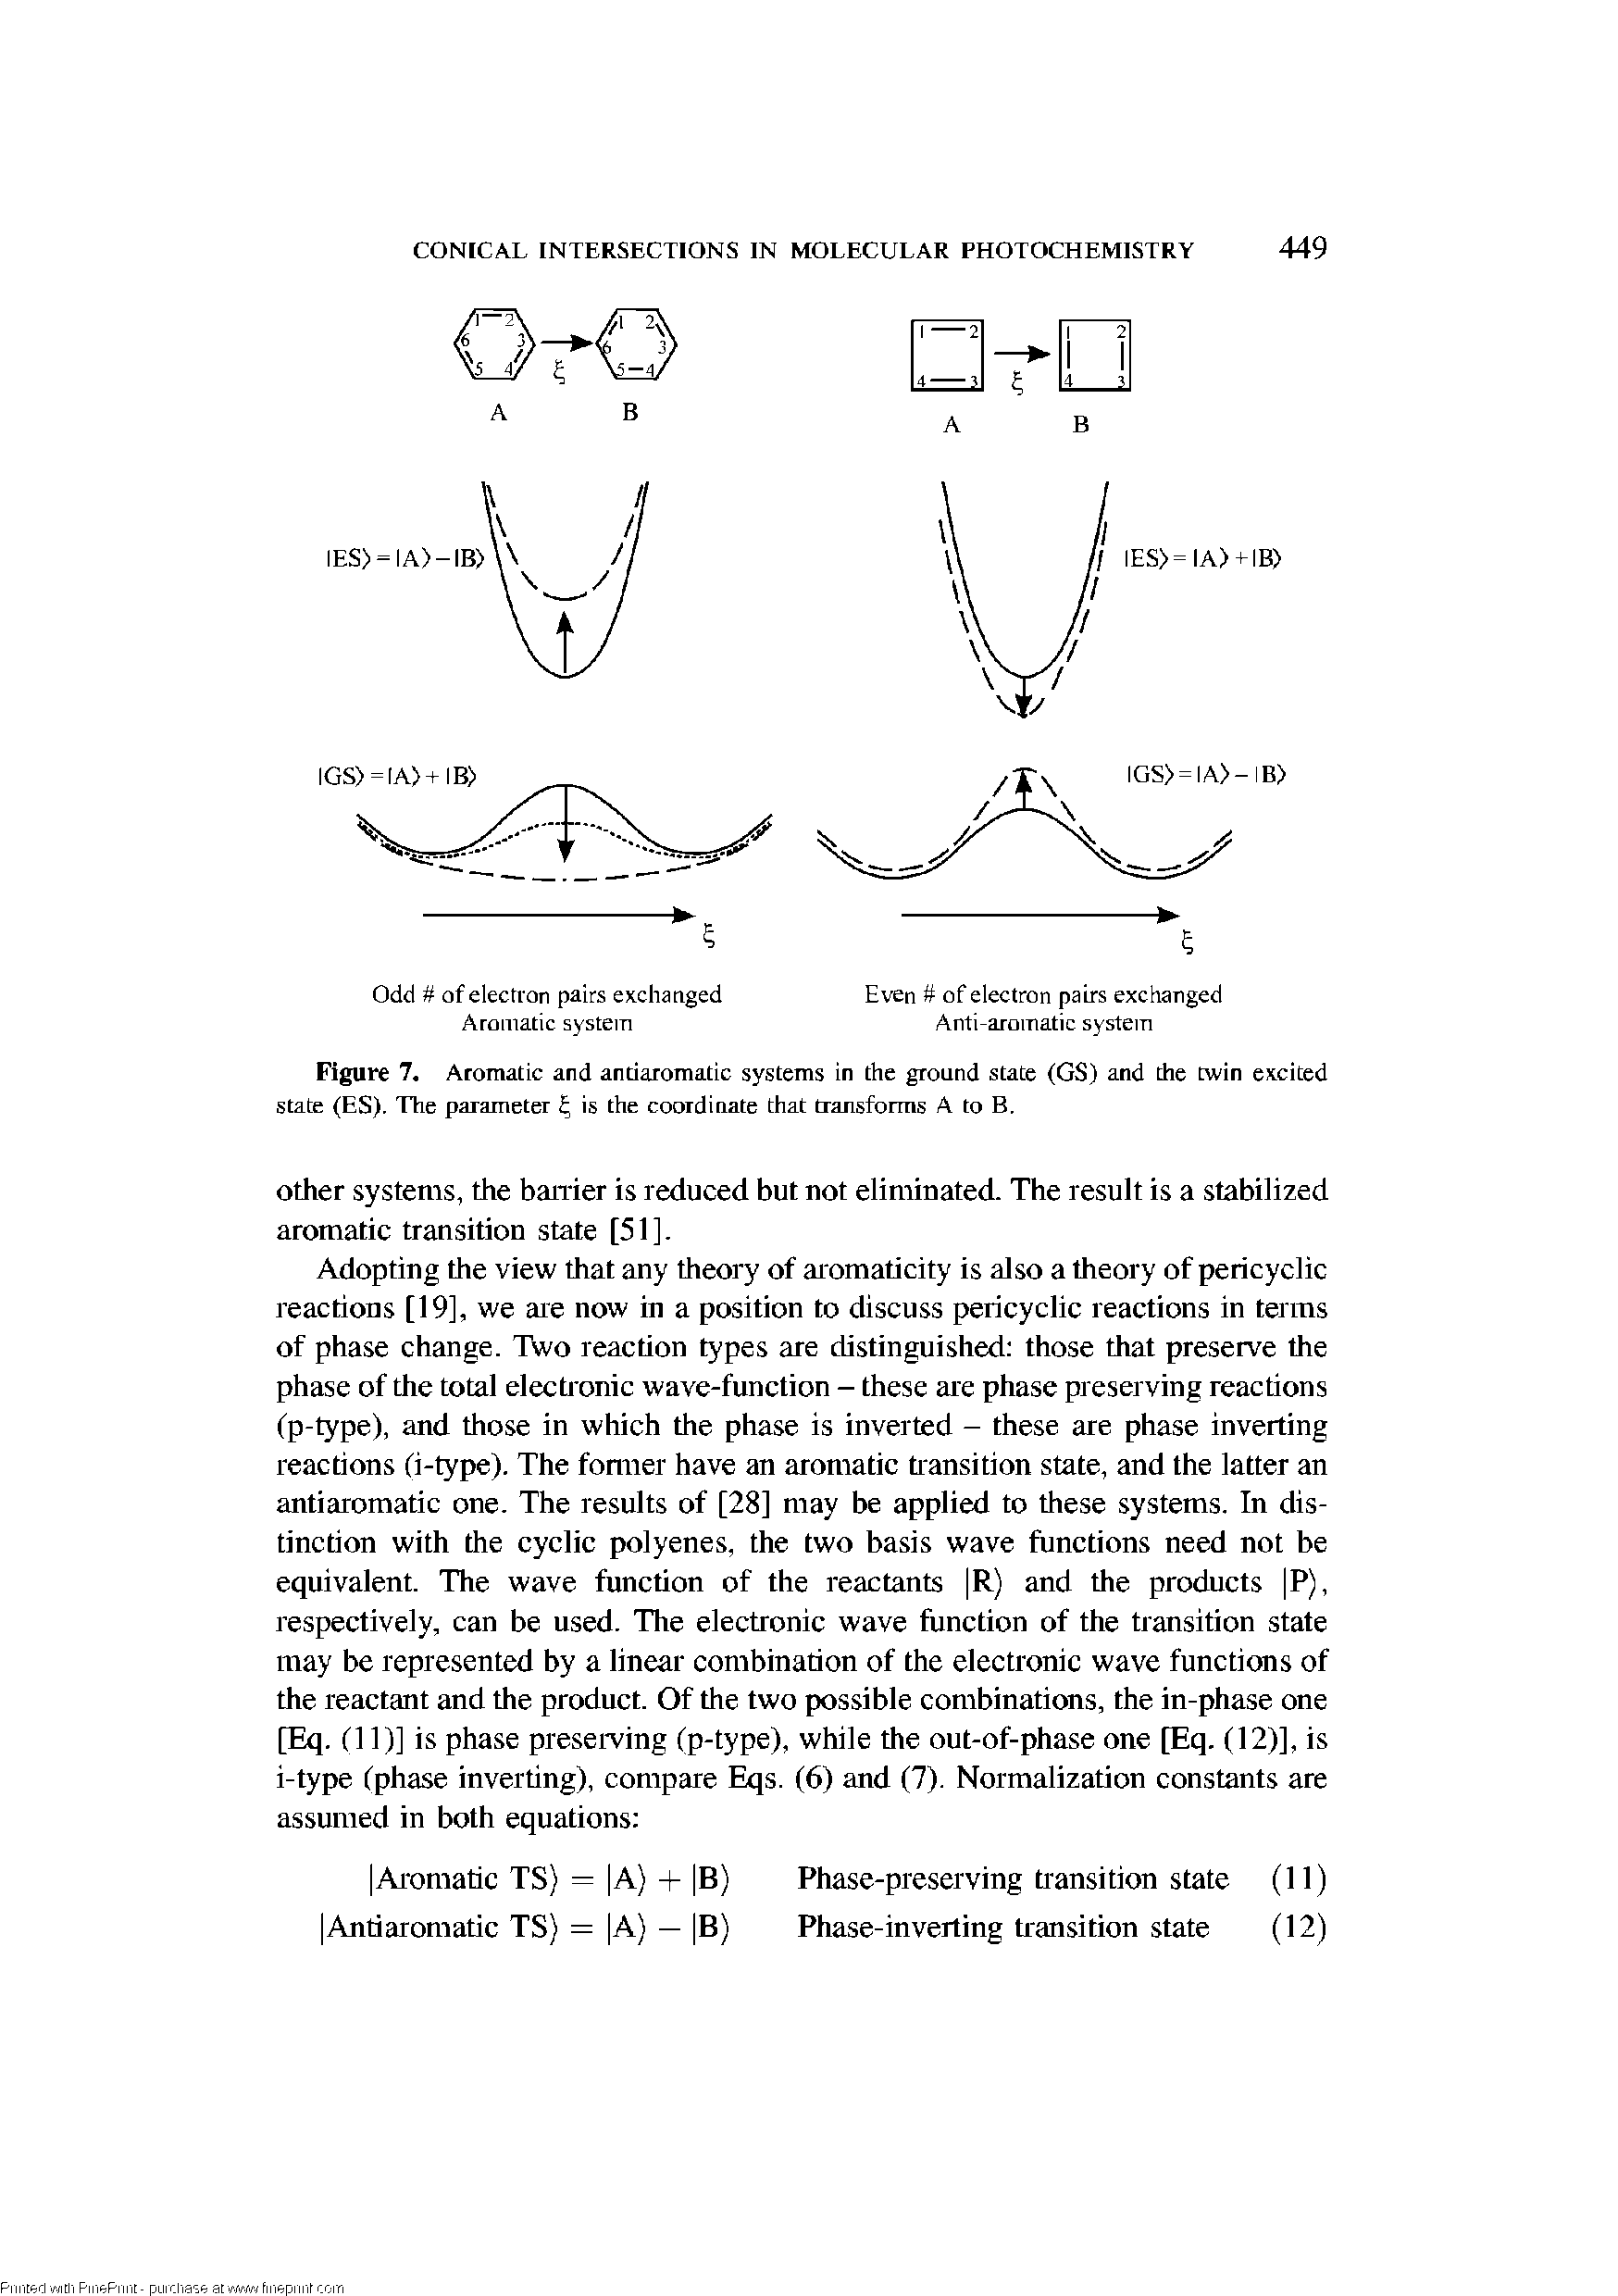 Figure 7, Aromatic and andaromatic systems in the ground state (GS) and the twin excited state (ES). The parameter is the coordinate that transforms A to B.